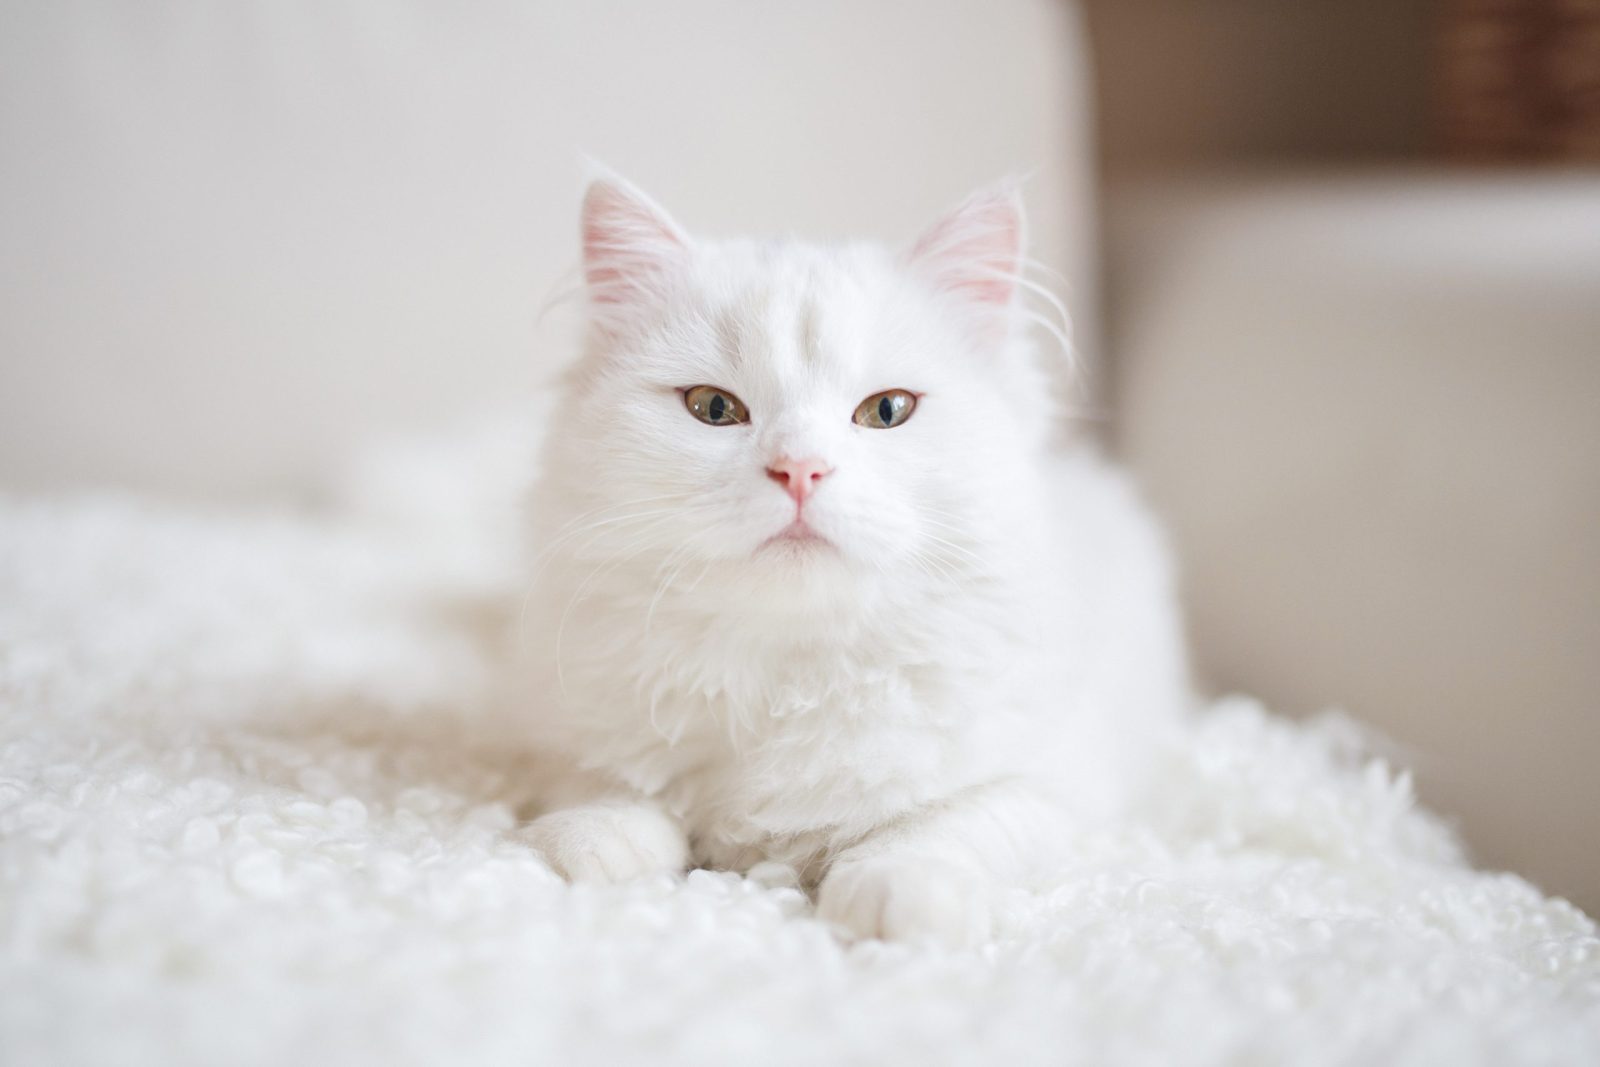 Adorable white fluffy cat